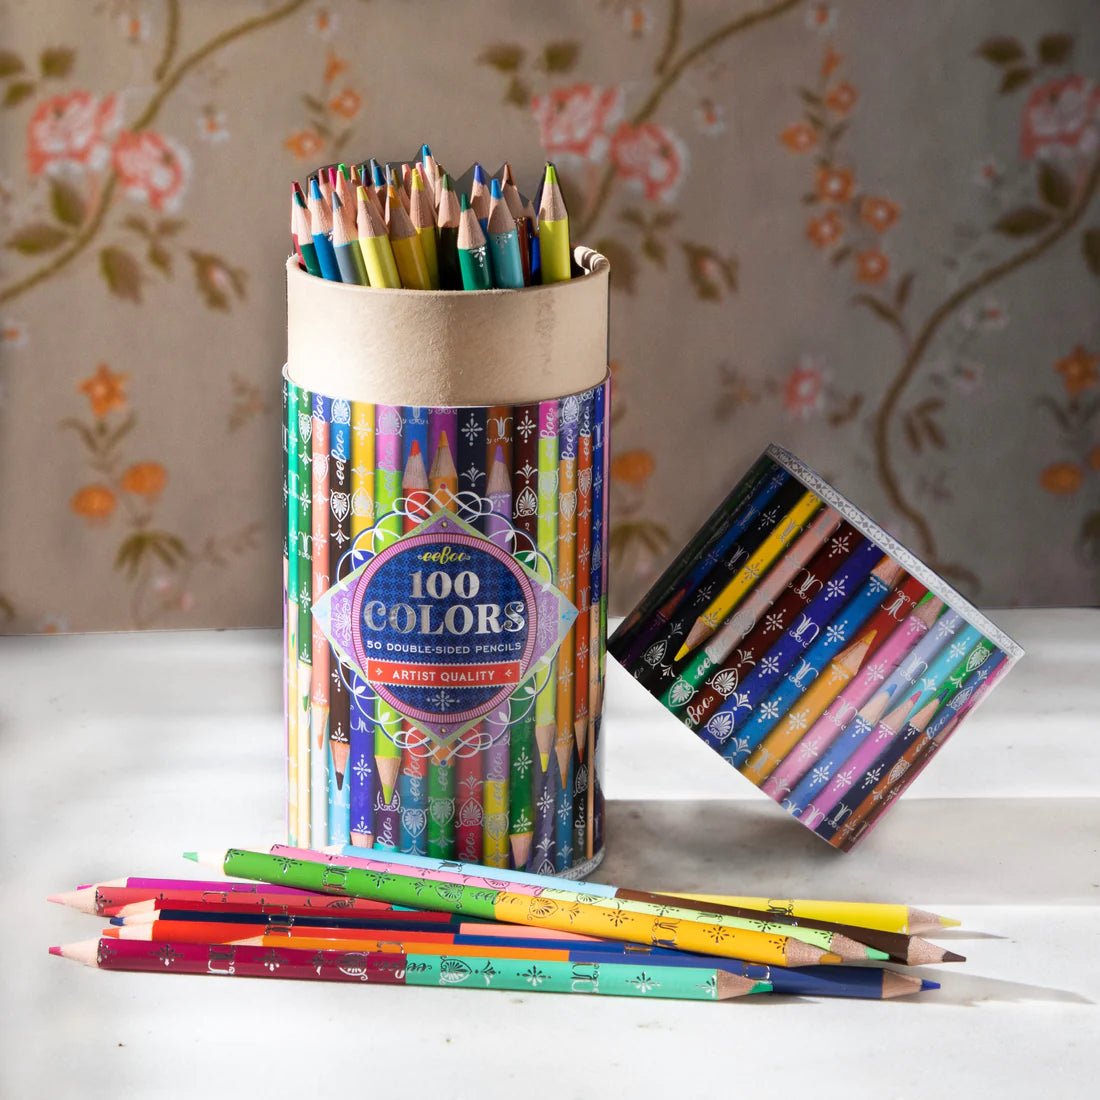 100 colors double-sided pencils